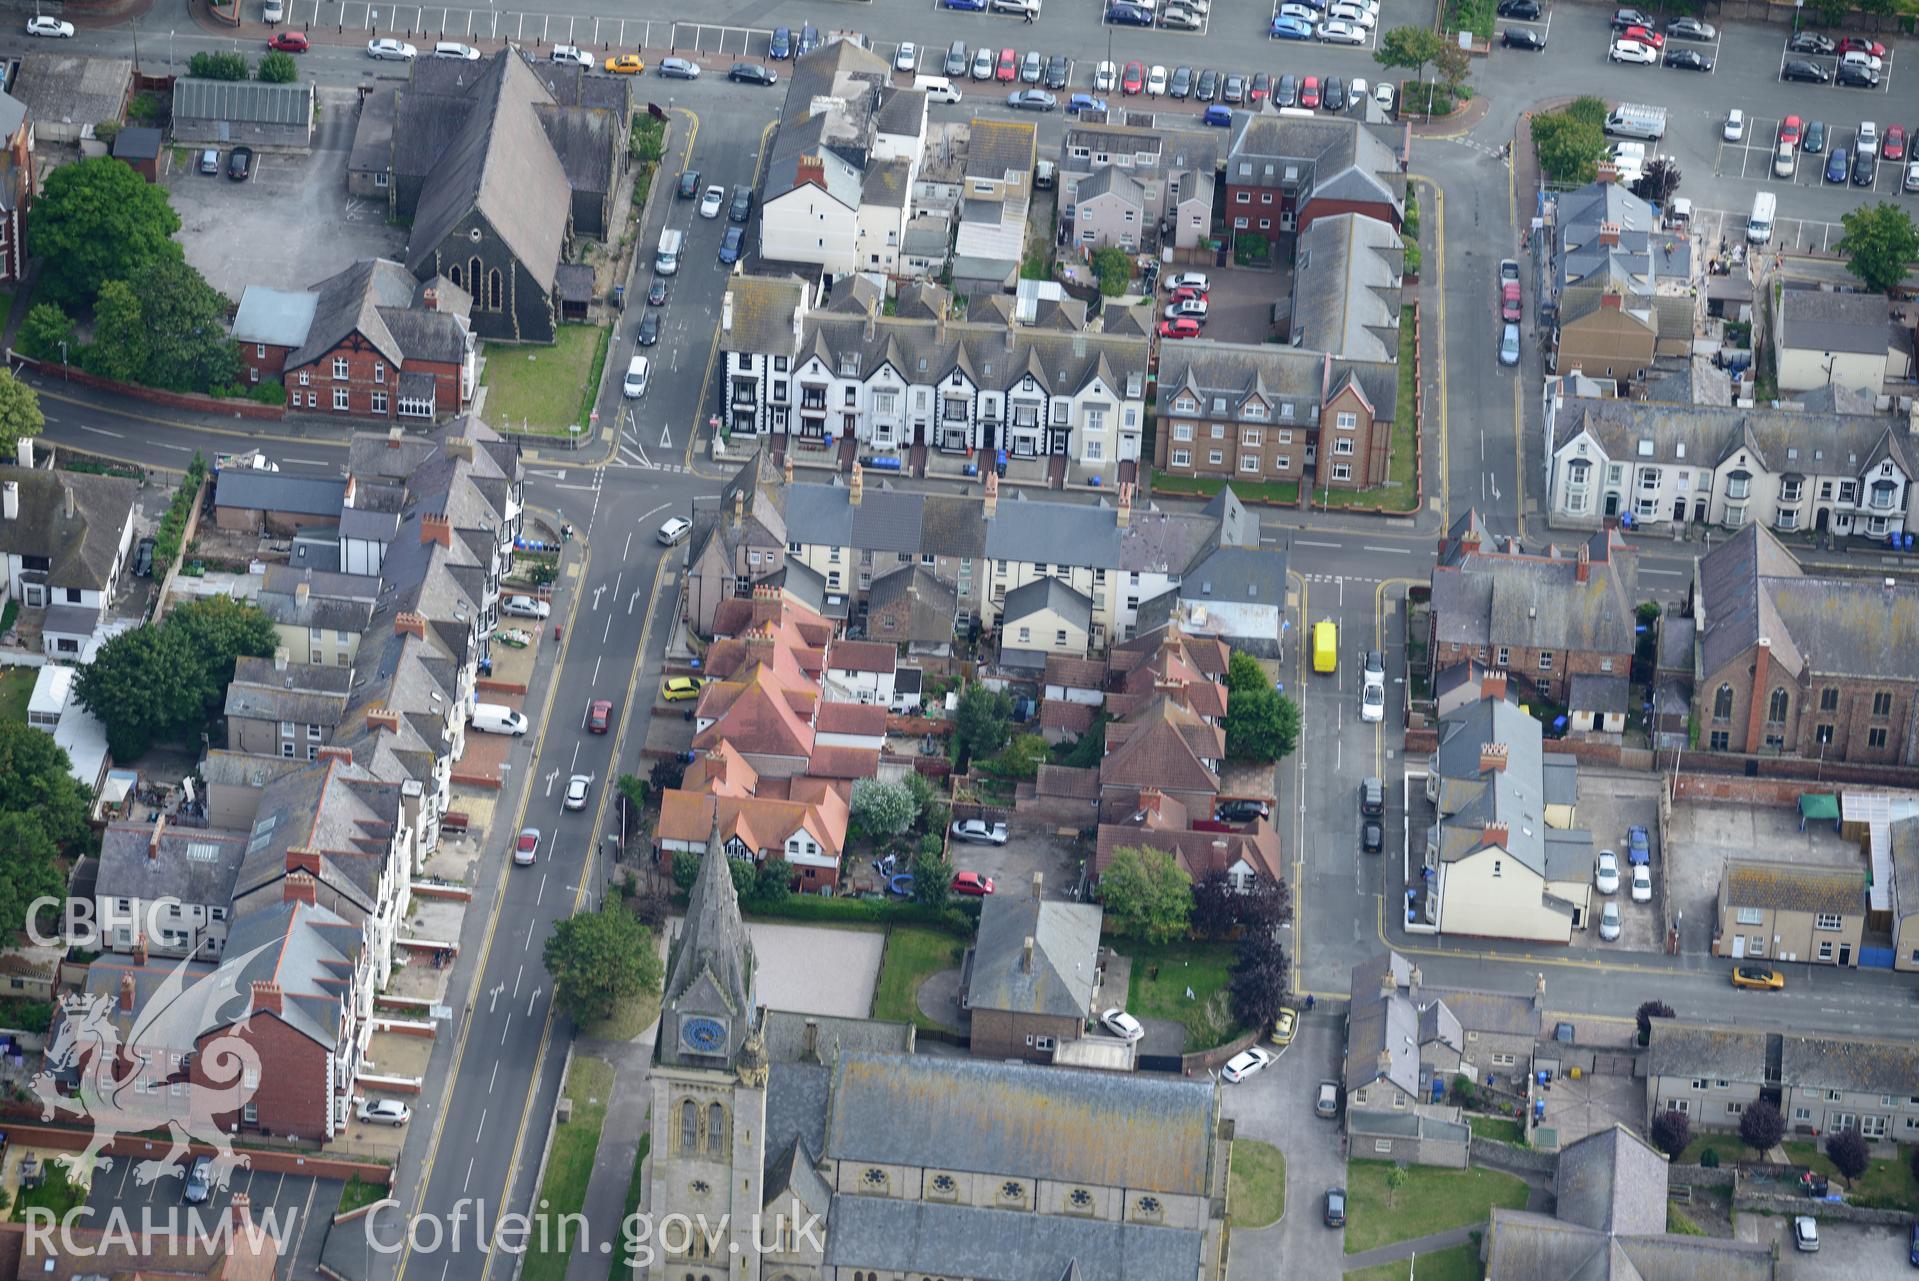 Town Hall, Wellington Road, Rhyl. Oblique aerial photograph taken during the Royal Commission's programme of archaeological aerial reconnaissance by Toby Driver on 11th September 2015.